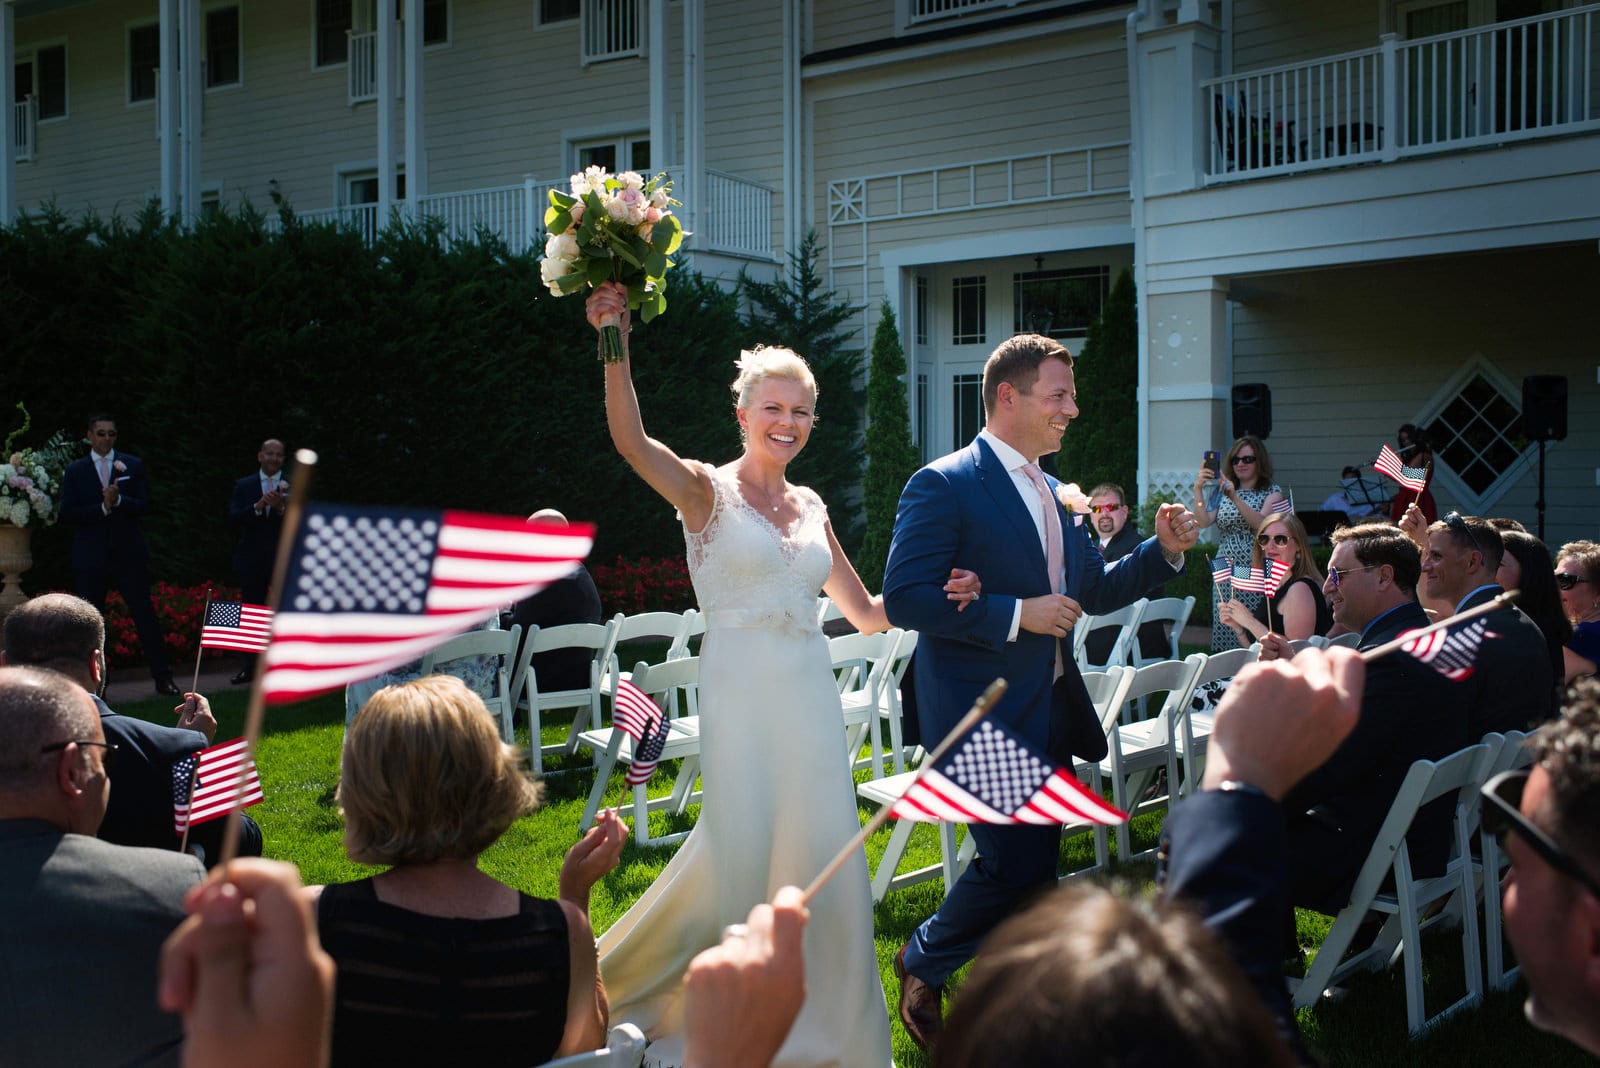 A bride smiles and lifts her bouquet in the air as she and her husband walk down the aisle after their outdoor wedding at the Omni Bedford Springs resort. Their guests are waving American flags because the wedding is on the fourth of July.